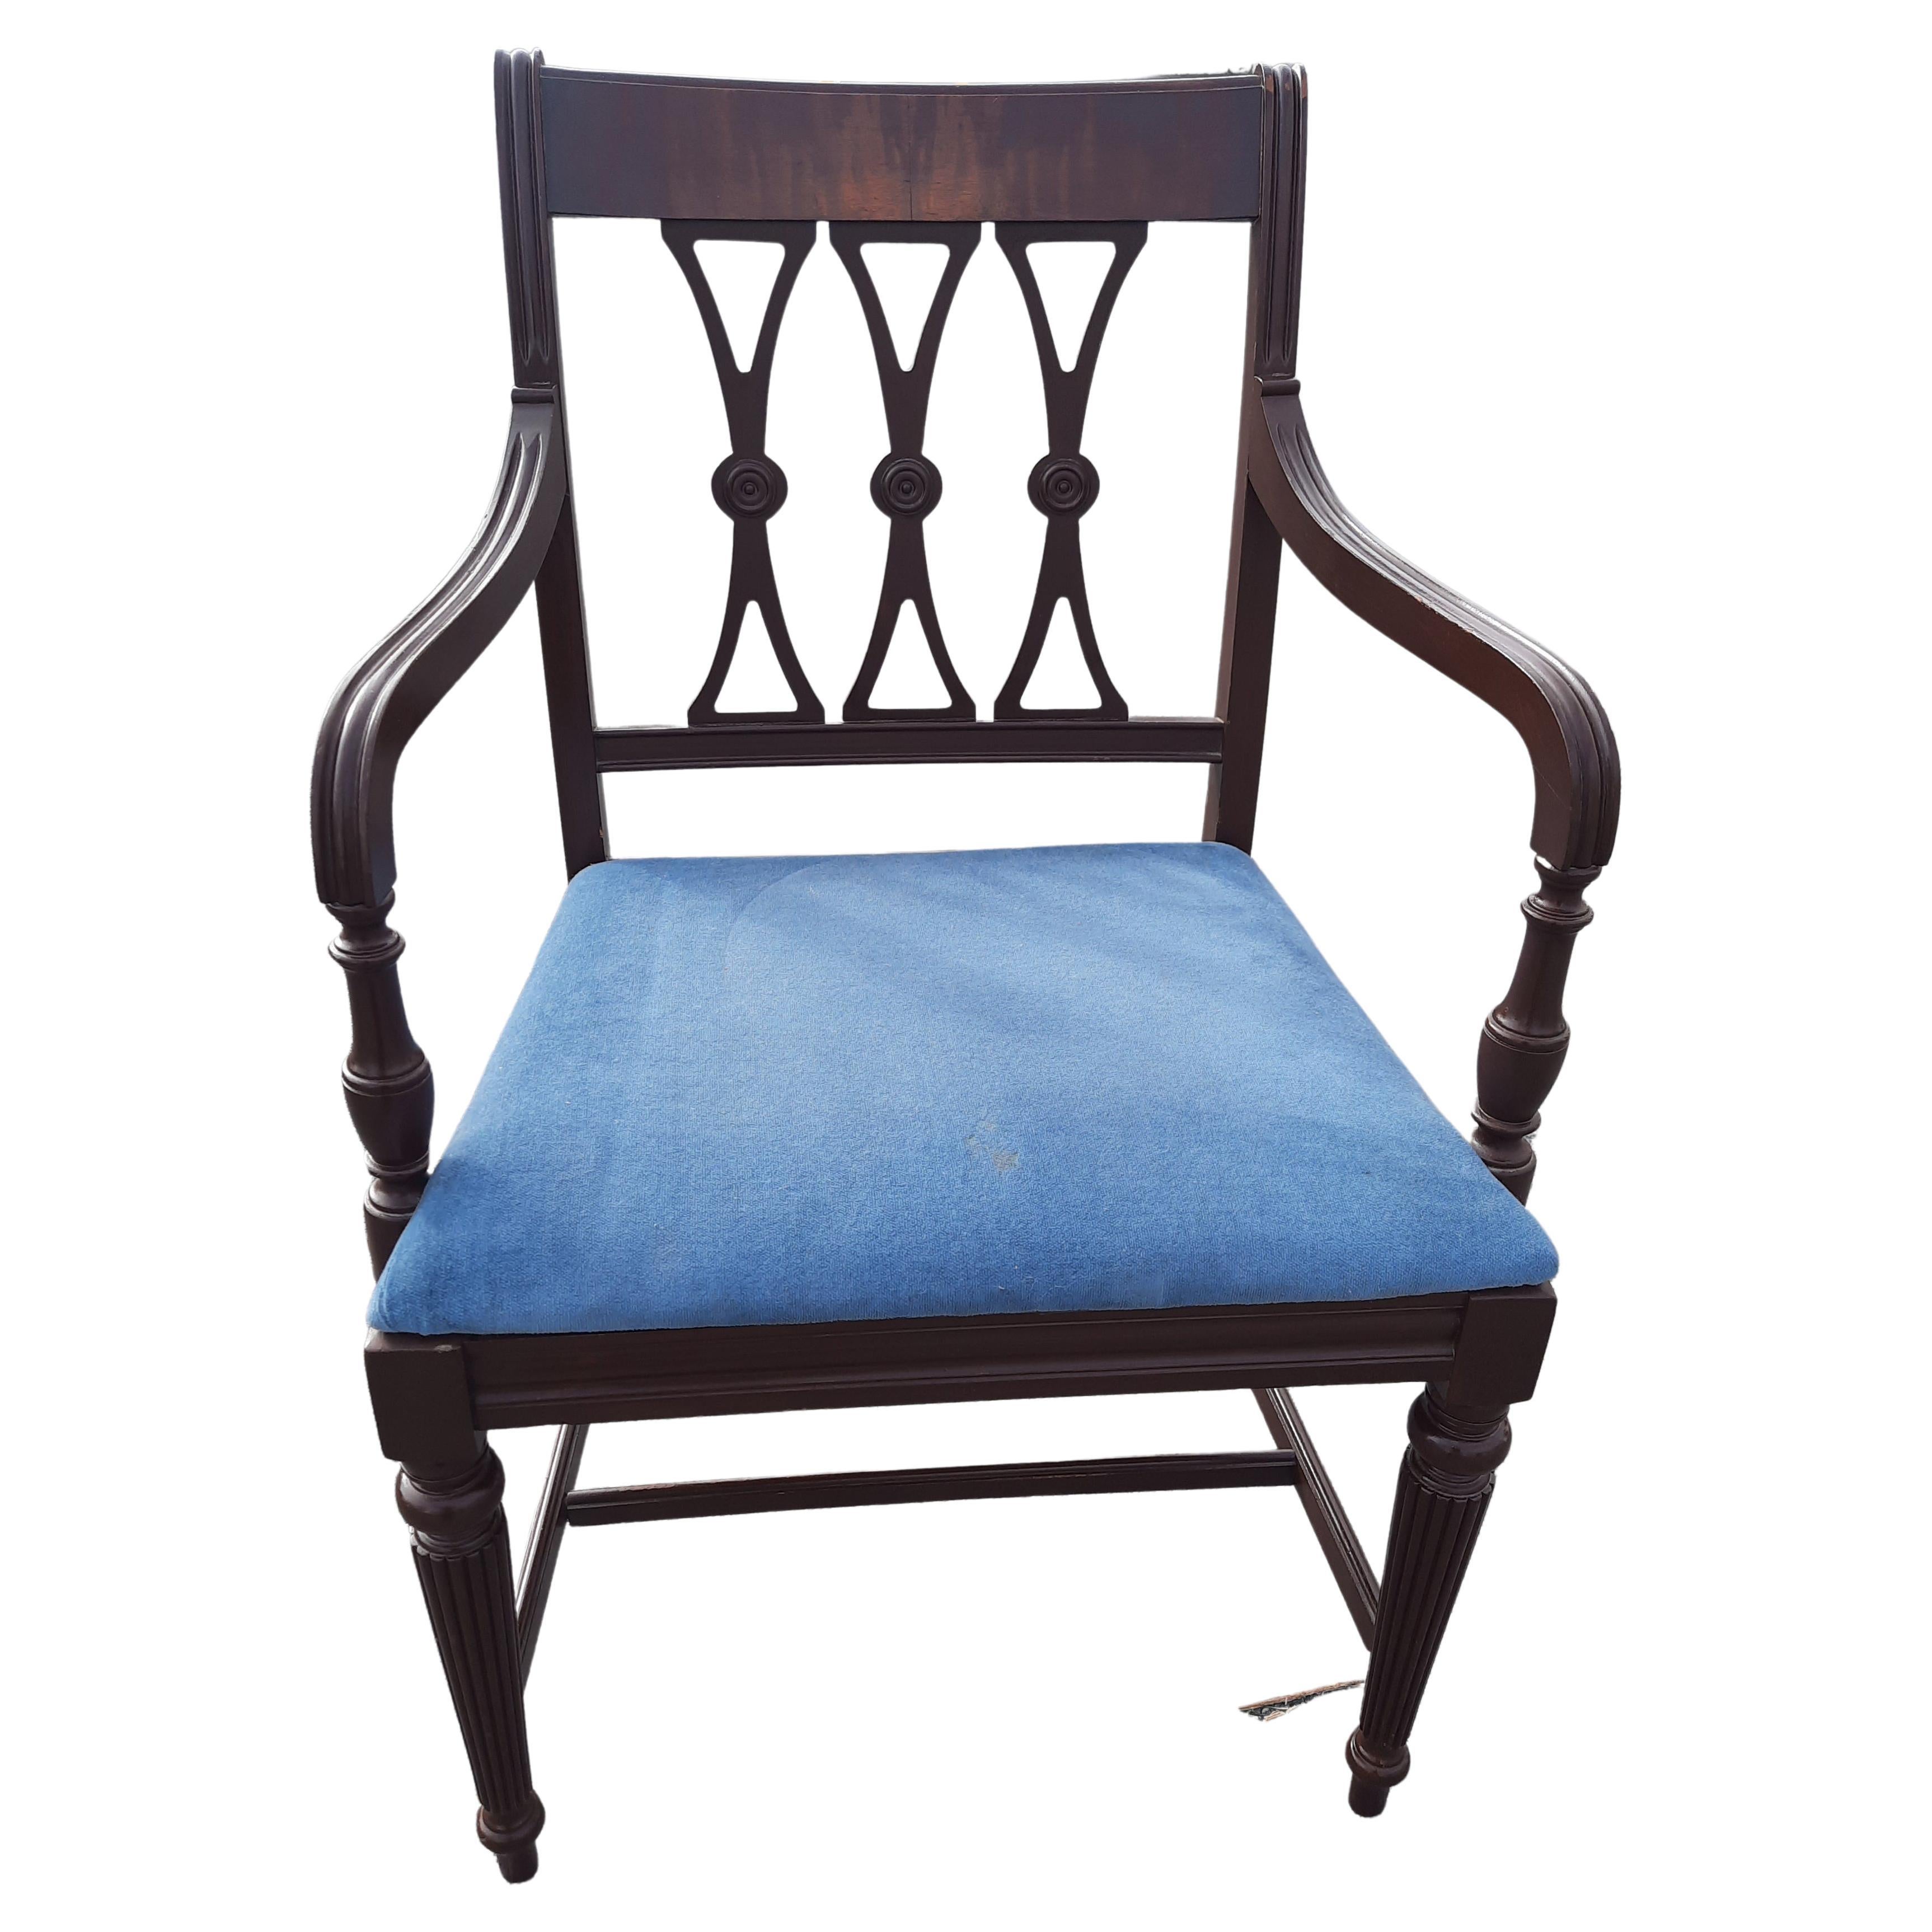 Antique Chippendale Mahogany Armchair, Circa 1930s